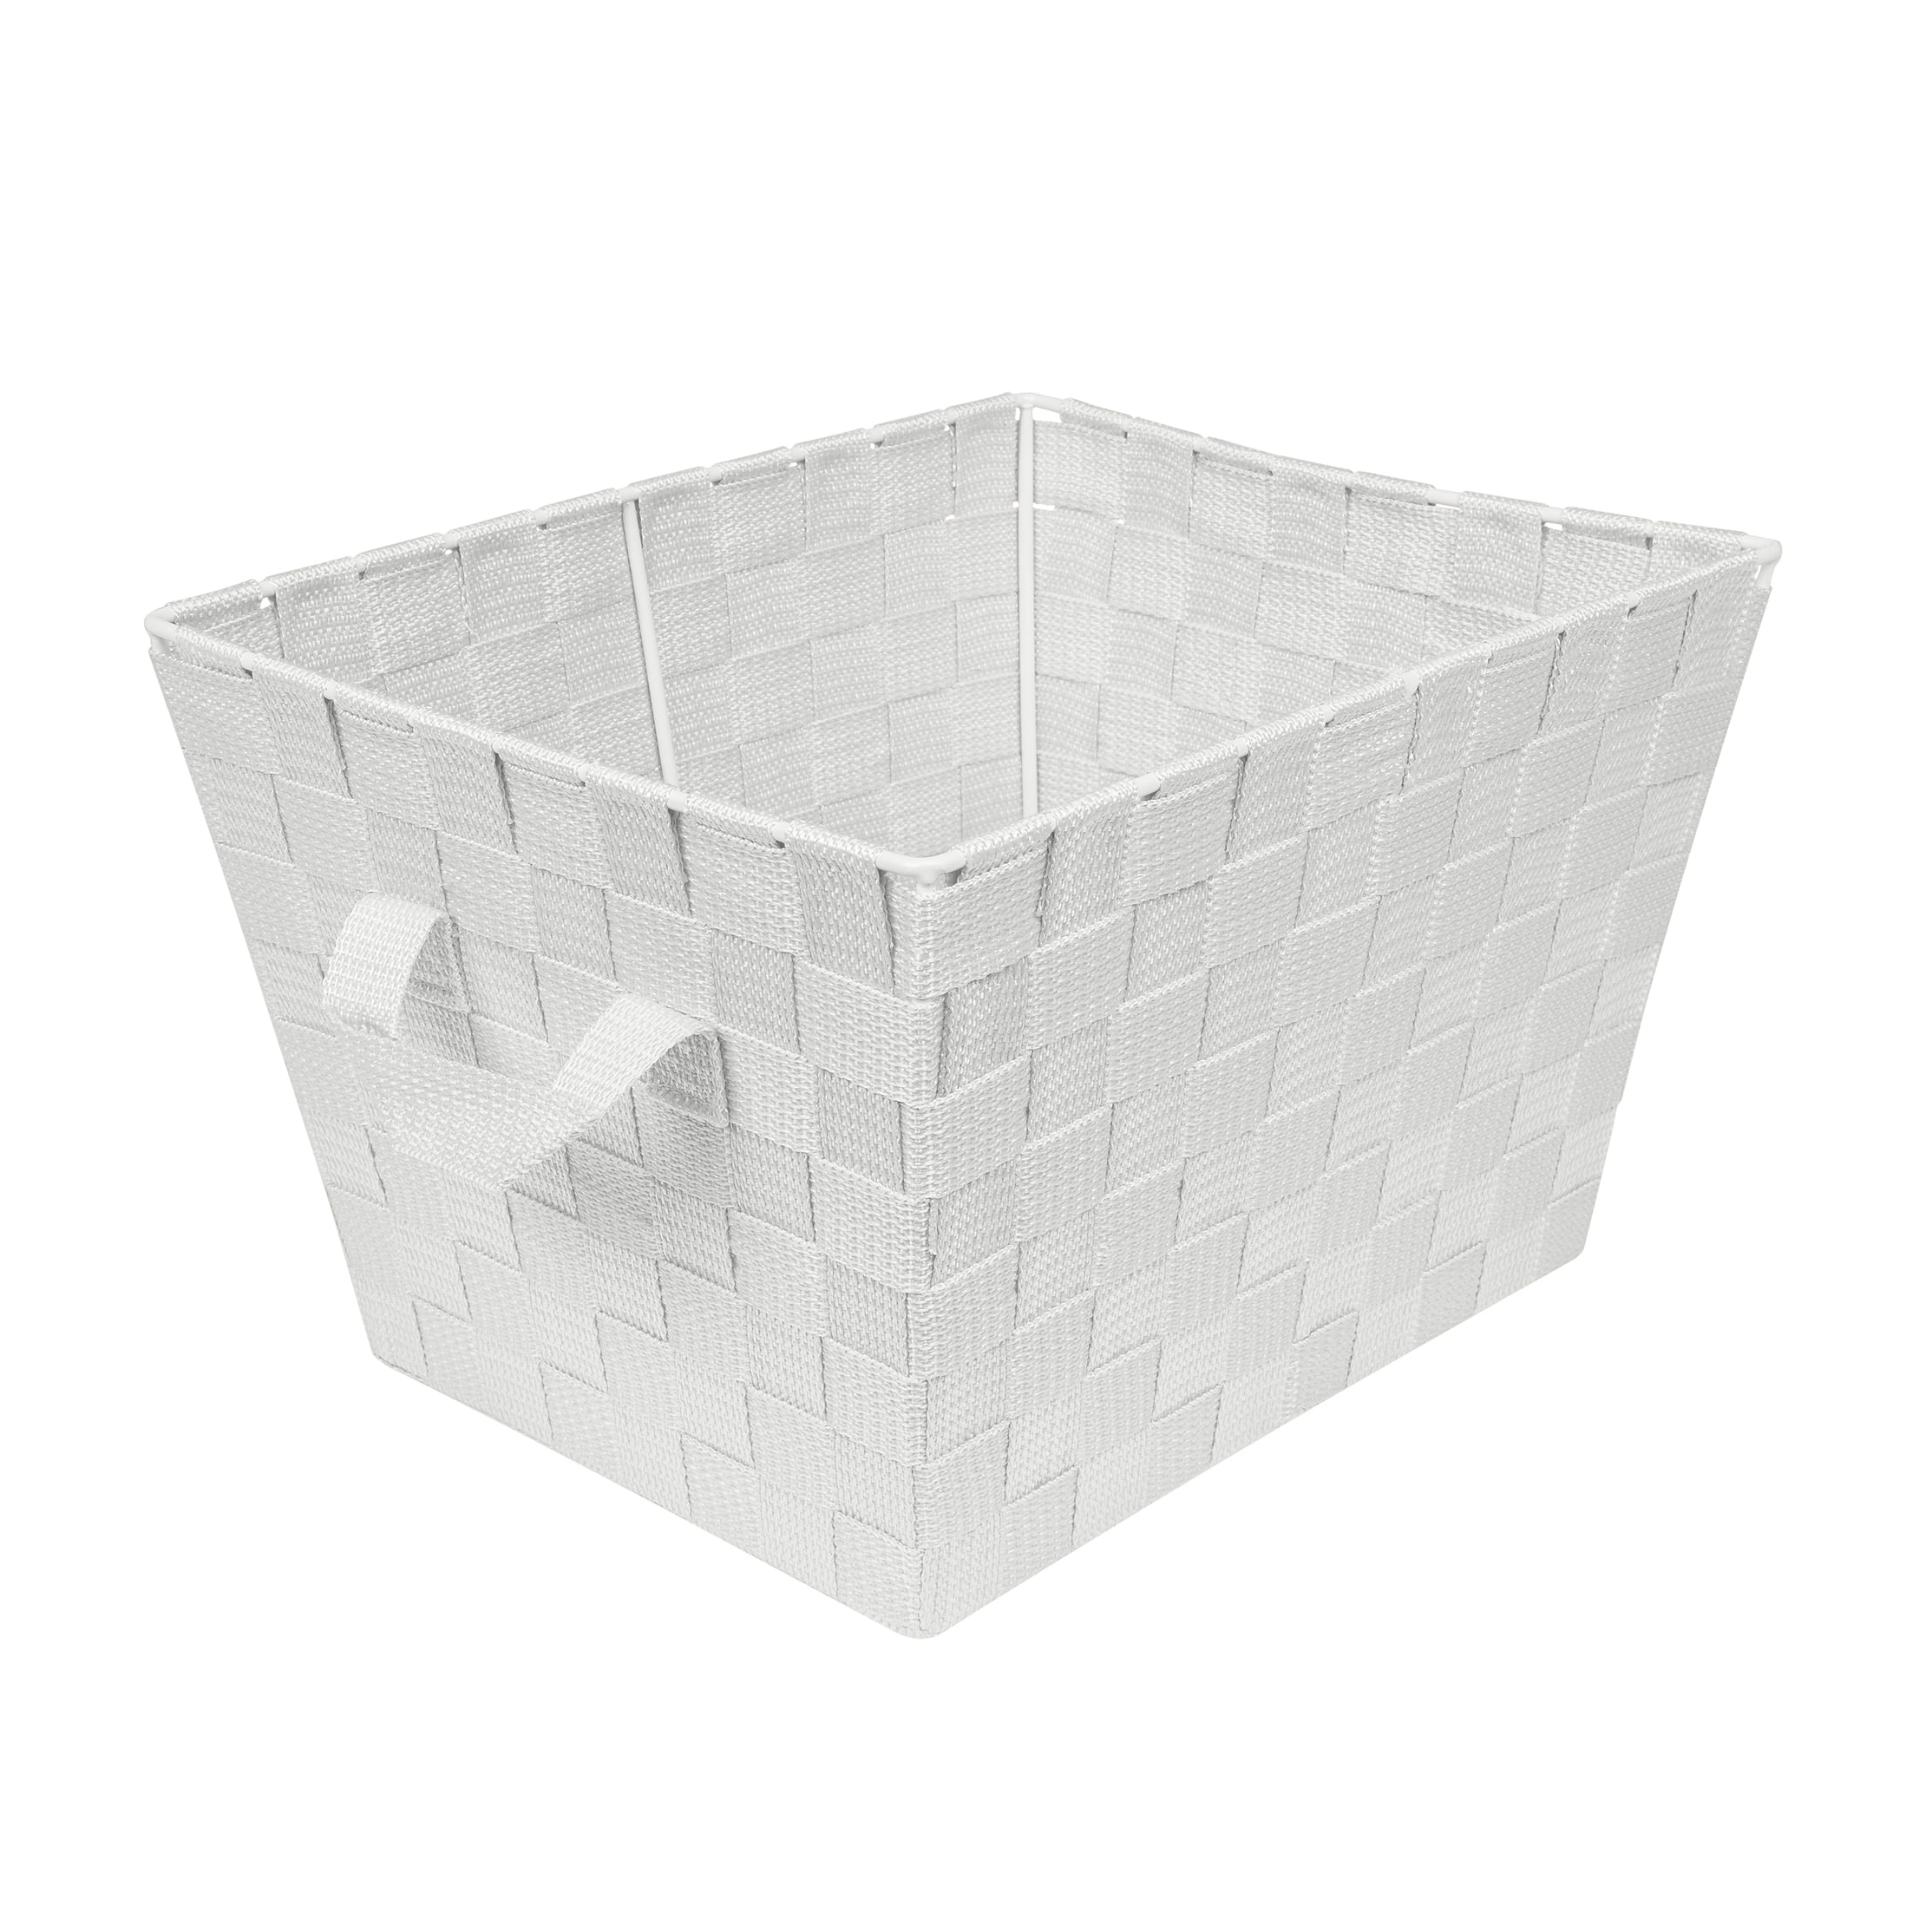 Simplify Small Woven Storage Basket in Grey - image 1 of 7